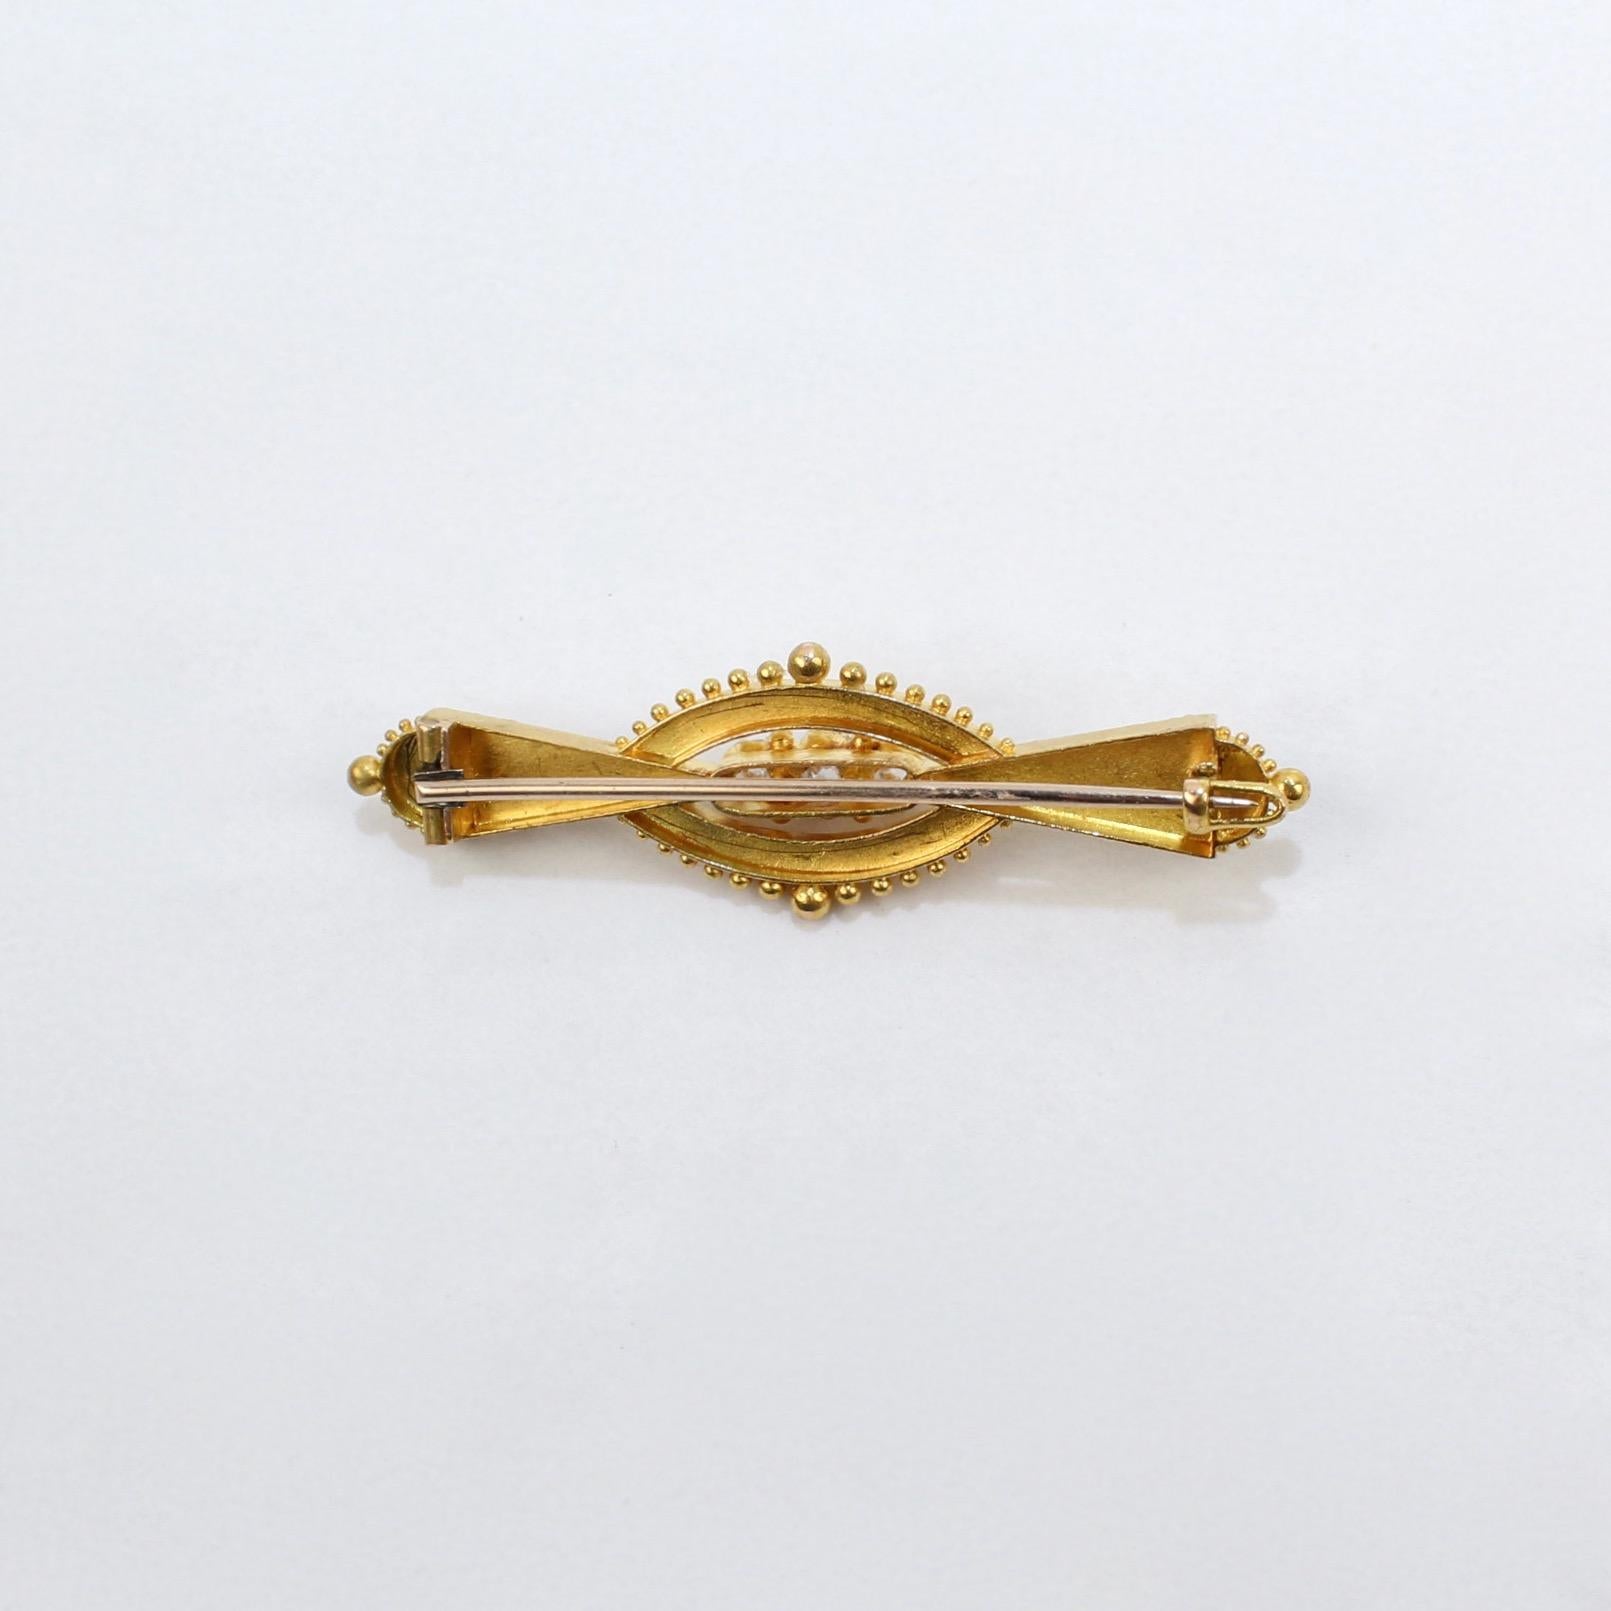 Antique Victorian Etruscan Revival 14 Karat Gold and Diamond Brooch or Pin In Good Condition For Sale In Philadelphia, PA